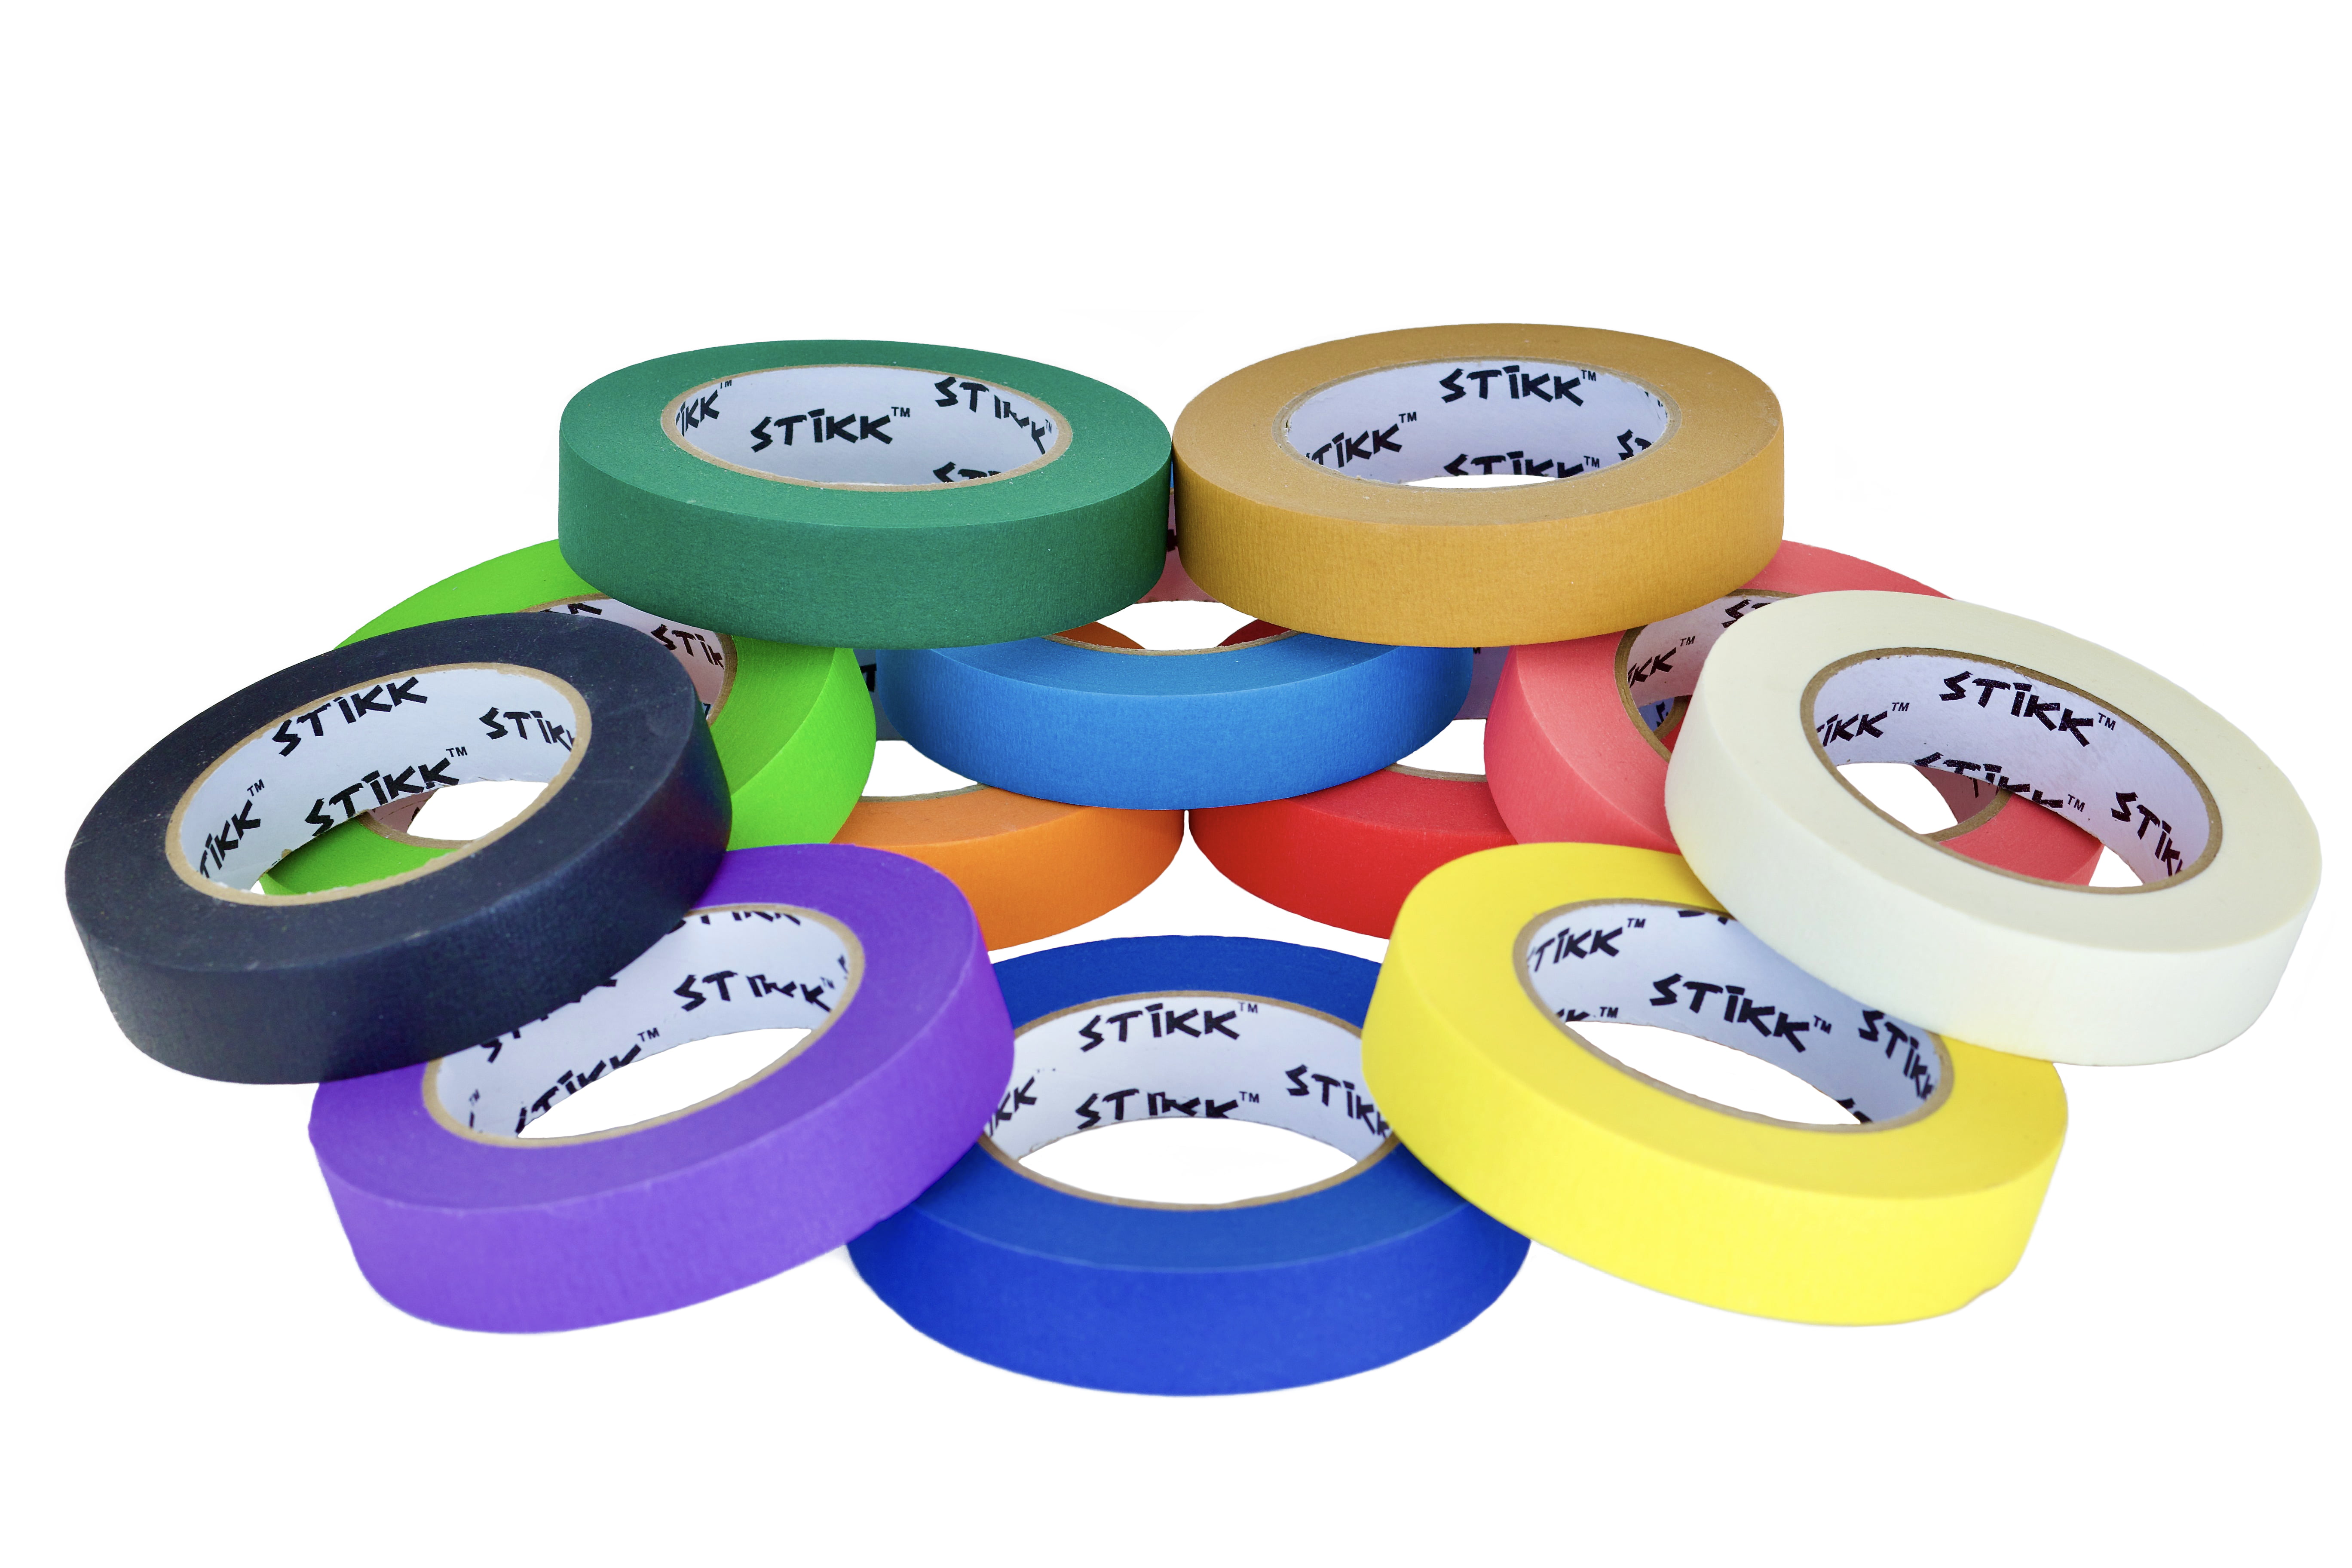 Green 7-Day Clean Removal Painter's Tape - 275 Series - Electro Tape